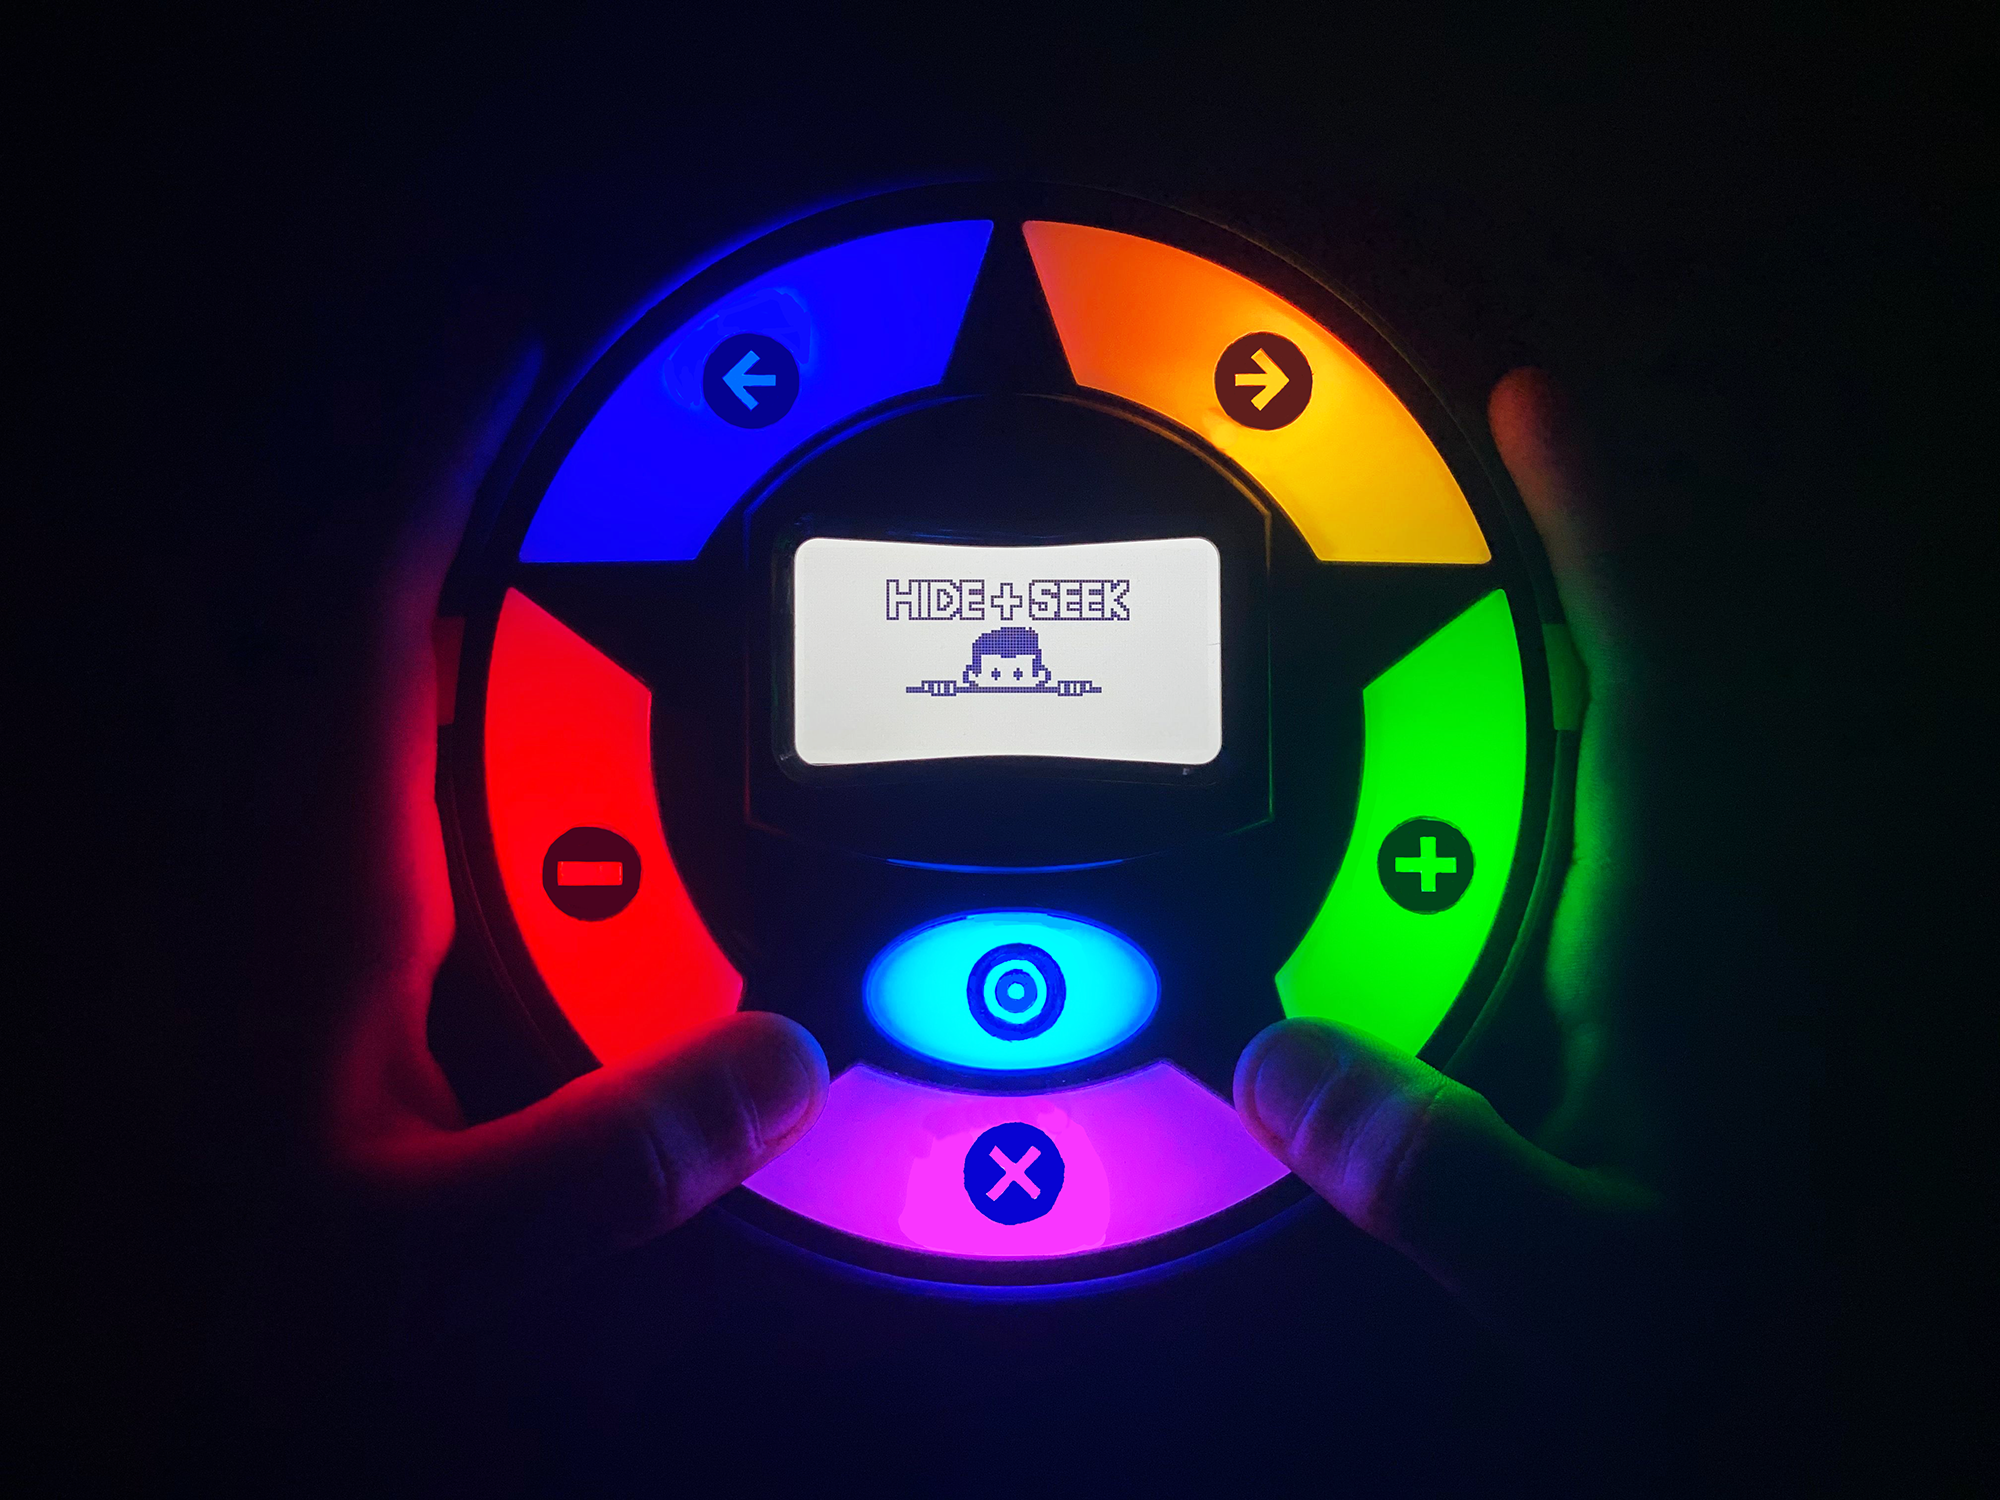 Courtesy. Punta Gorda-based Pressure Games has been working for two years on a new toy called Countdown, an active hide-and-seek game. It will launch April 6.